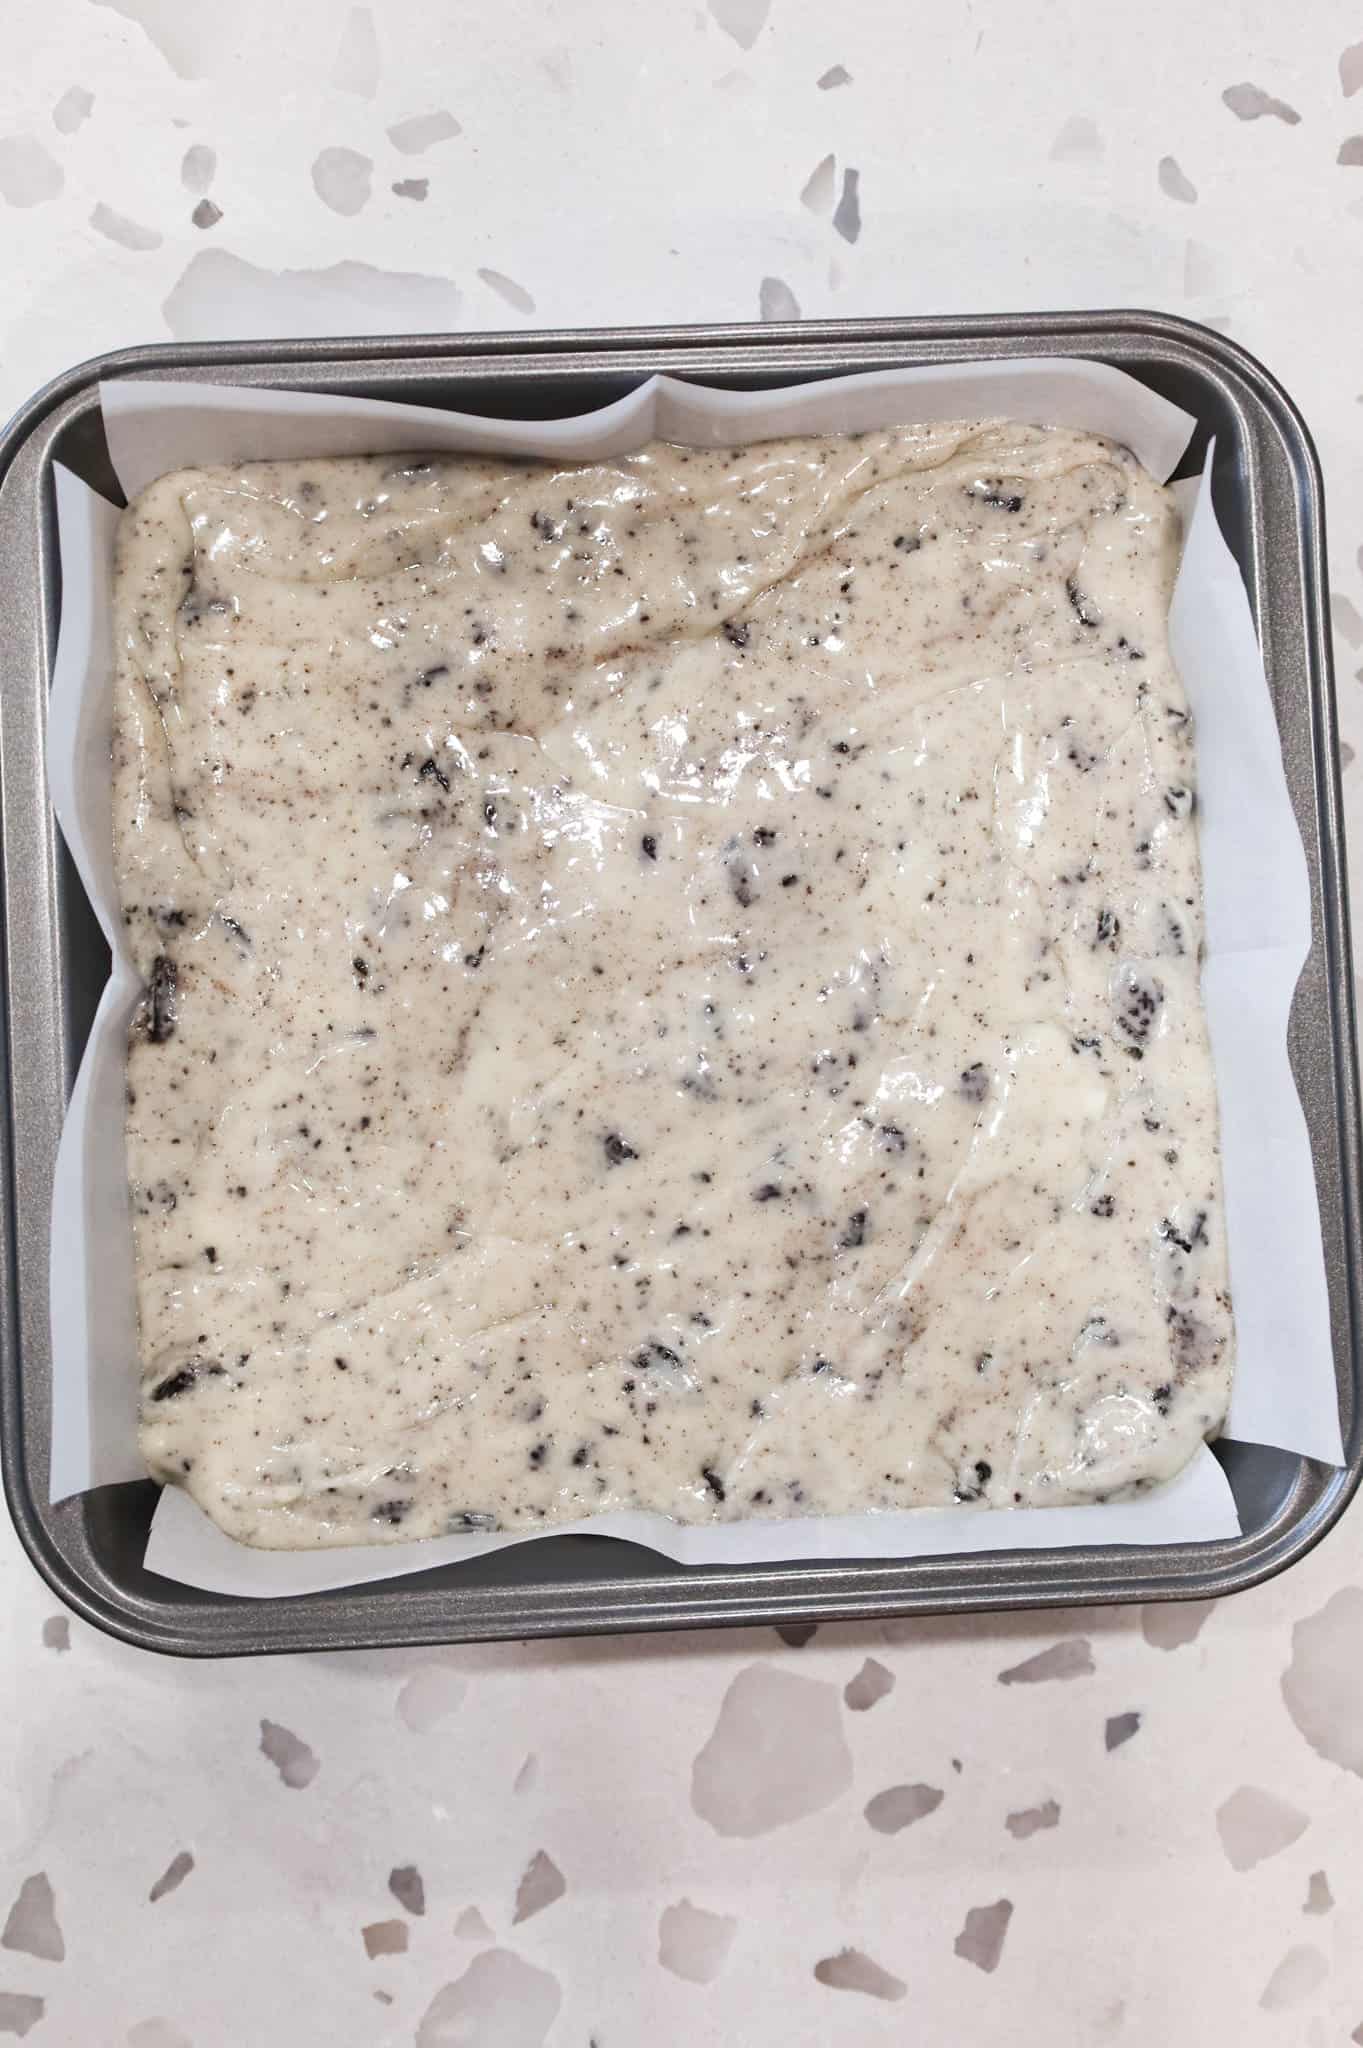 Oreo fudge mixture in a parchment lined baking pan